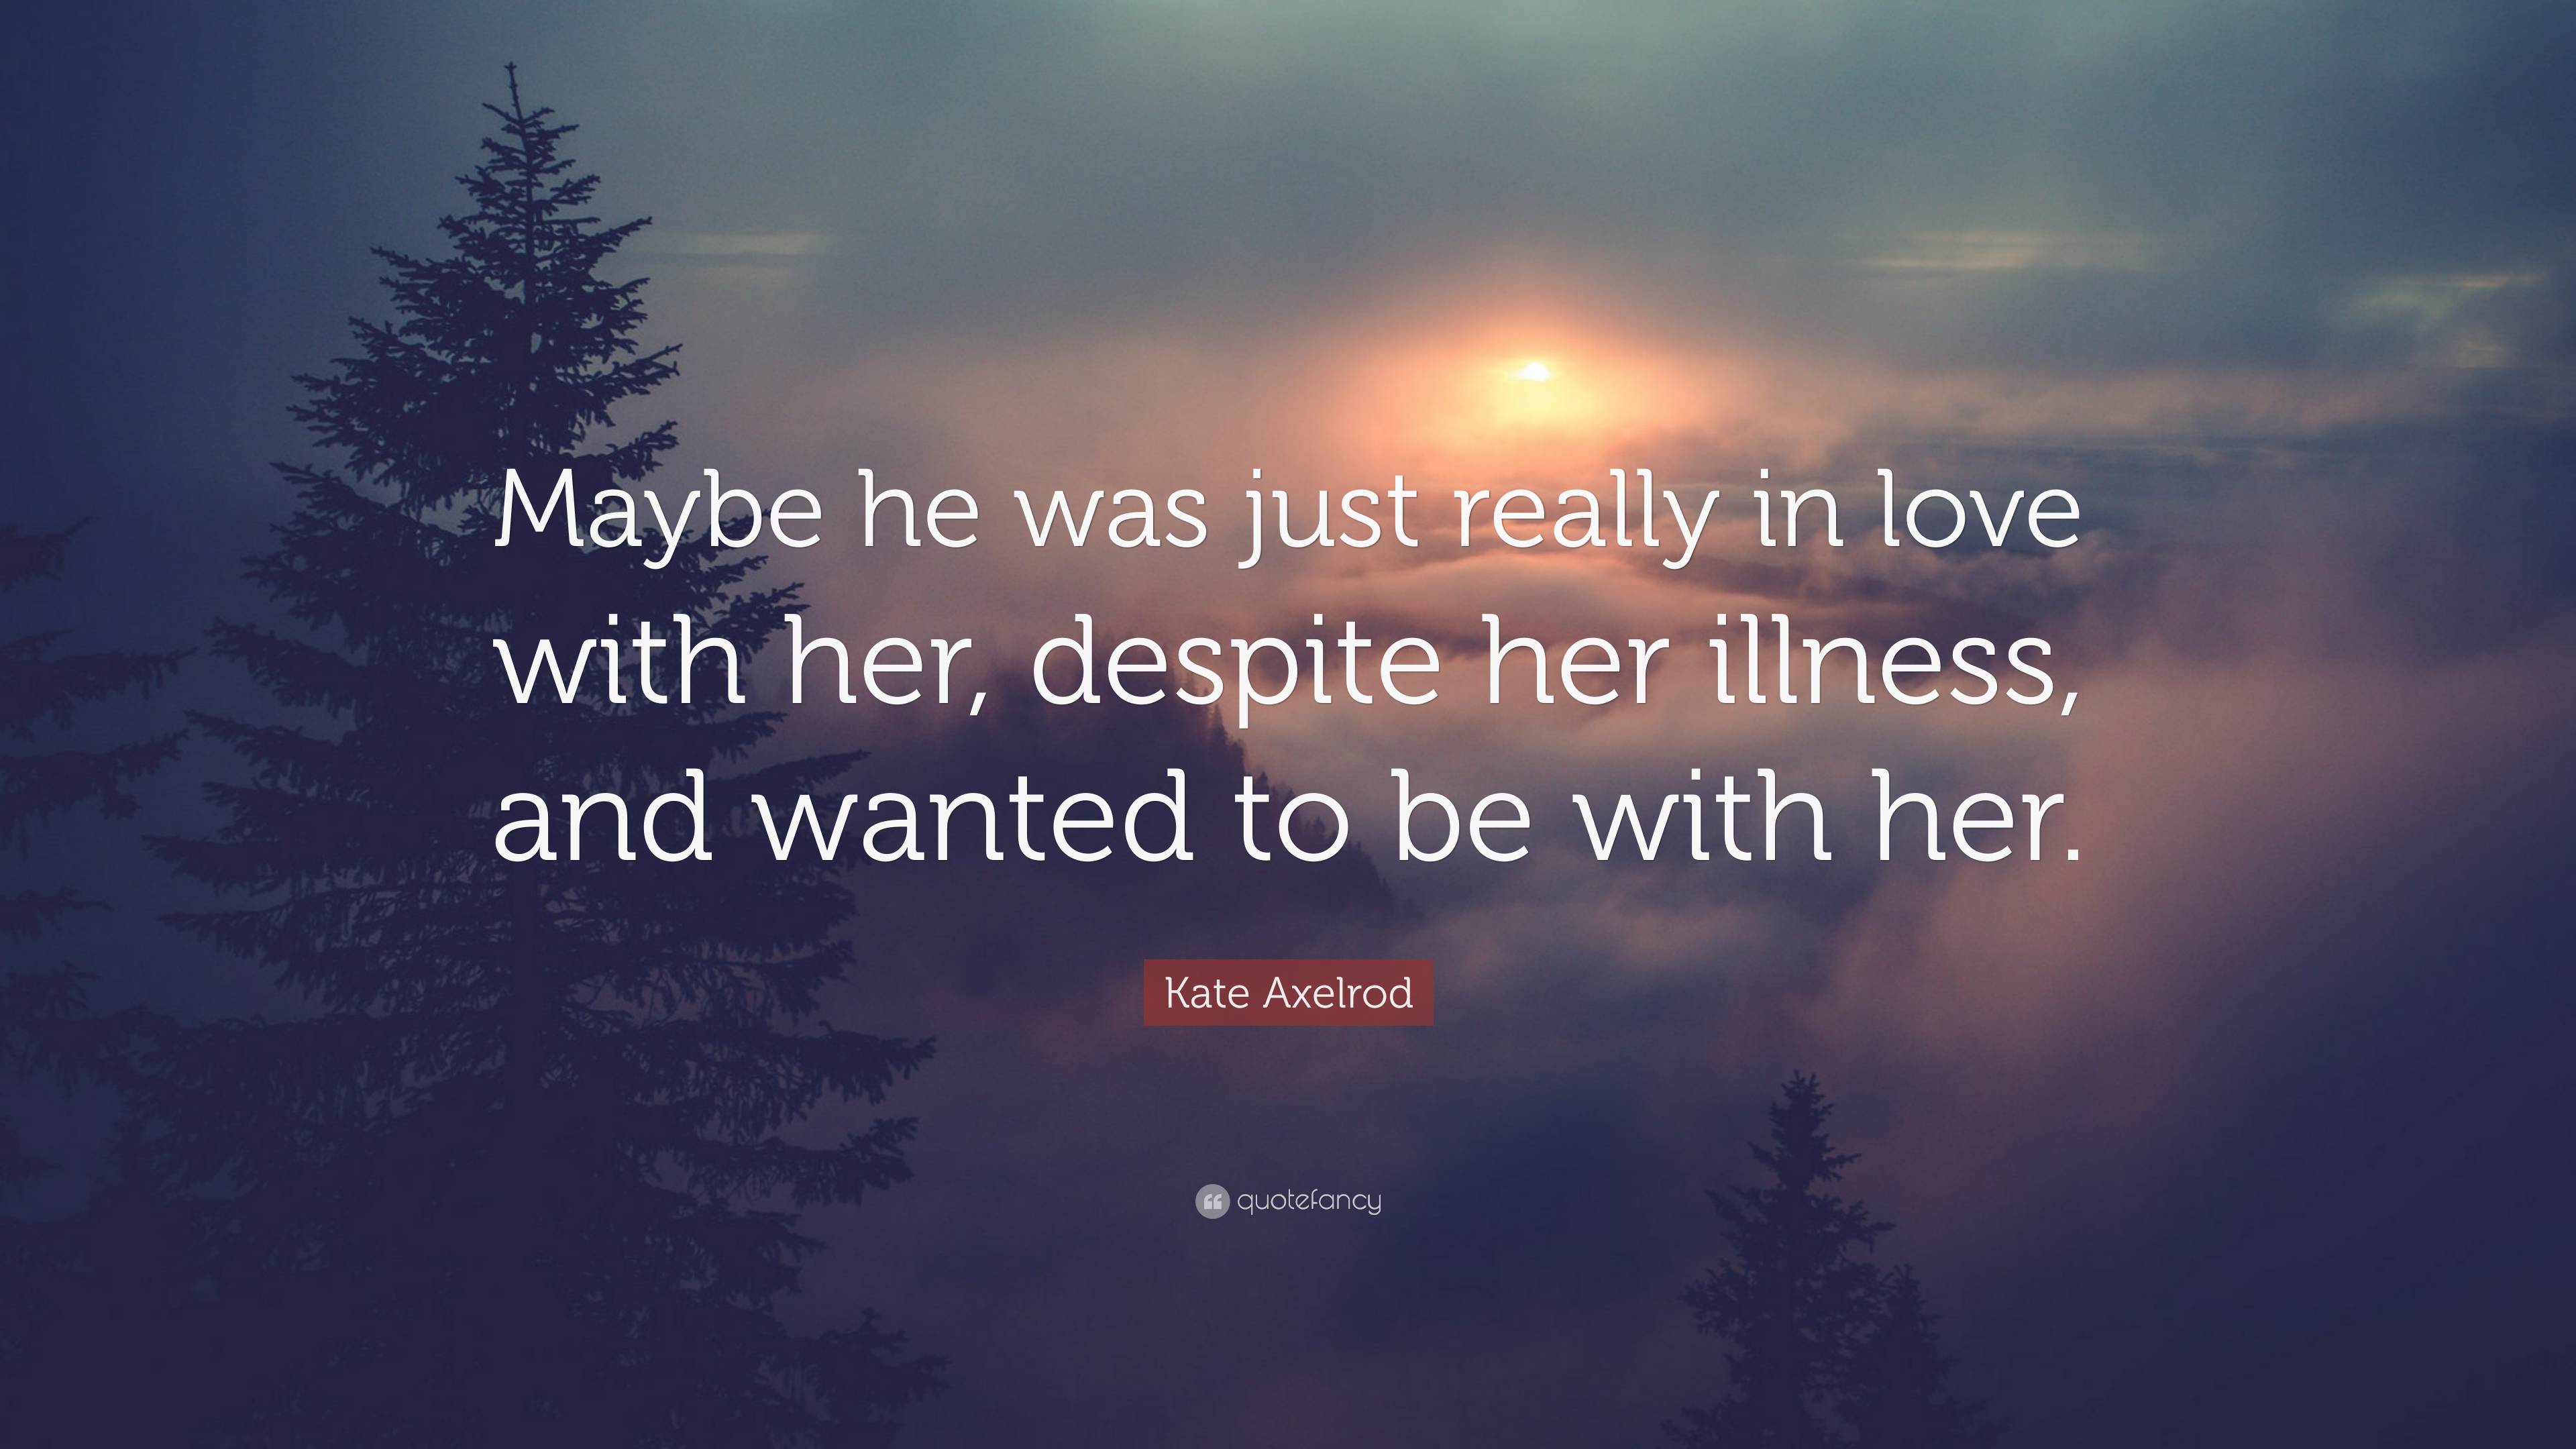 Kate Axelrod Quote: “Maybe he was just really in love with her, despite ...